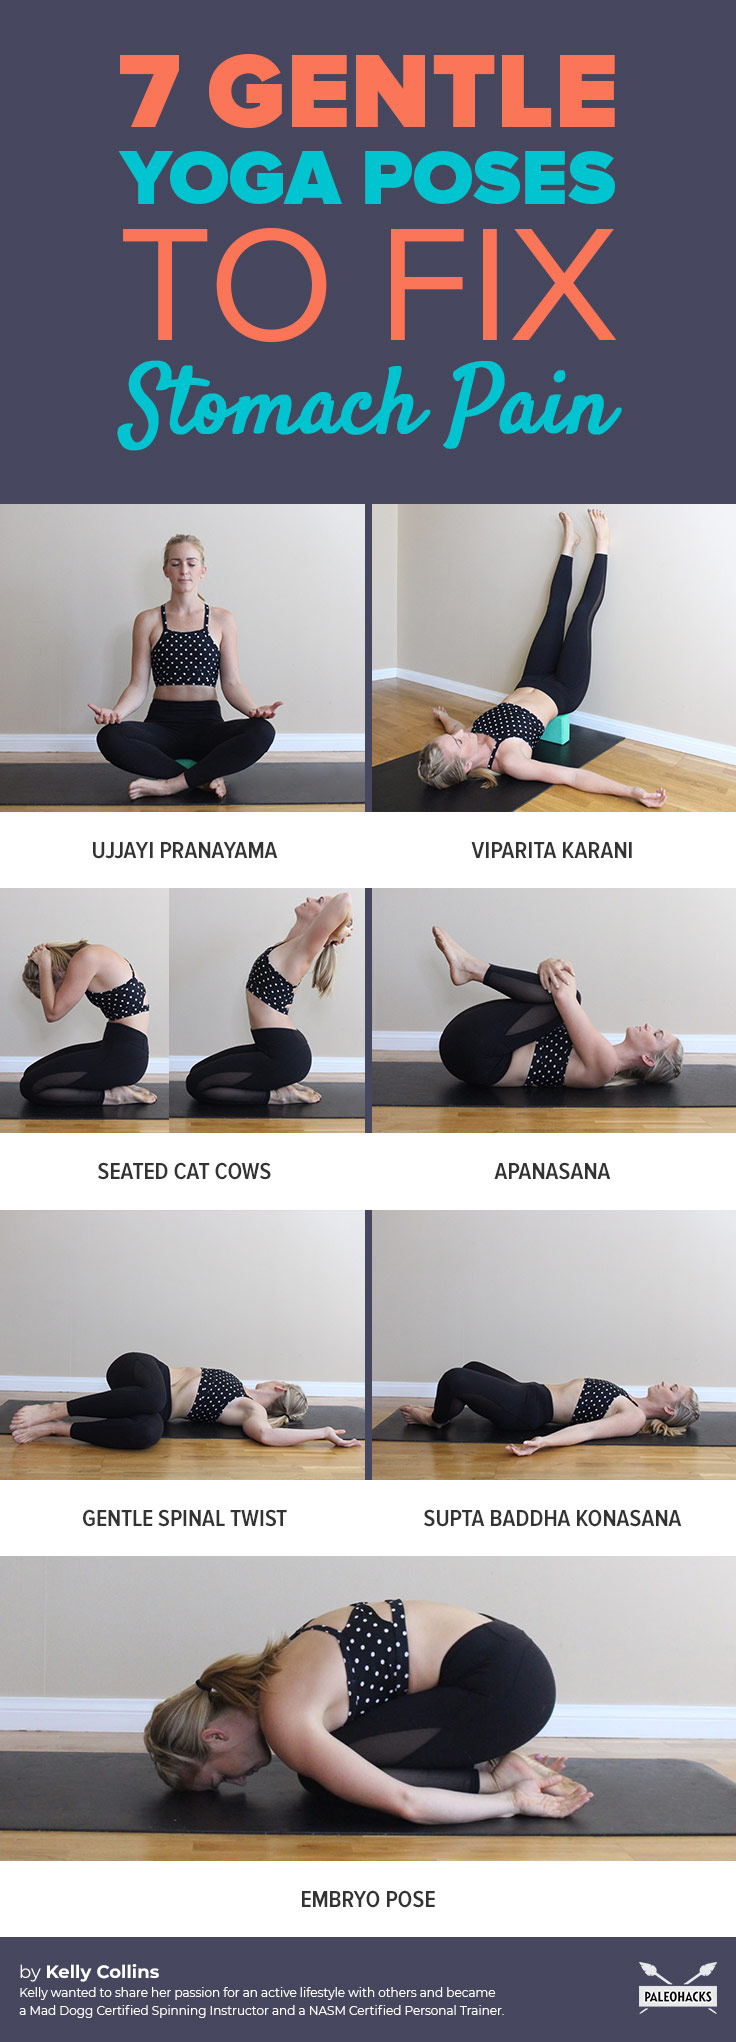 Use this gentle yoga routine for an upset stomach to increase vagal tone and peristalsis, bringing you back to a state of comfort.